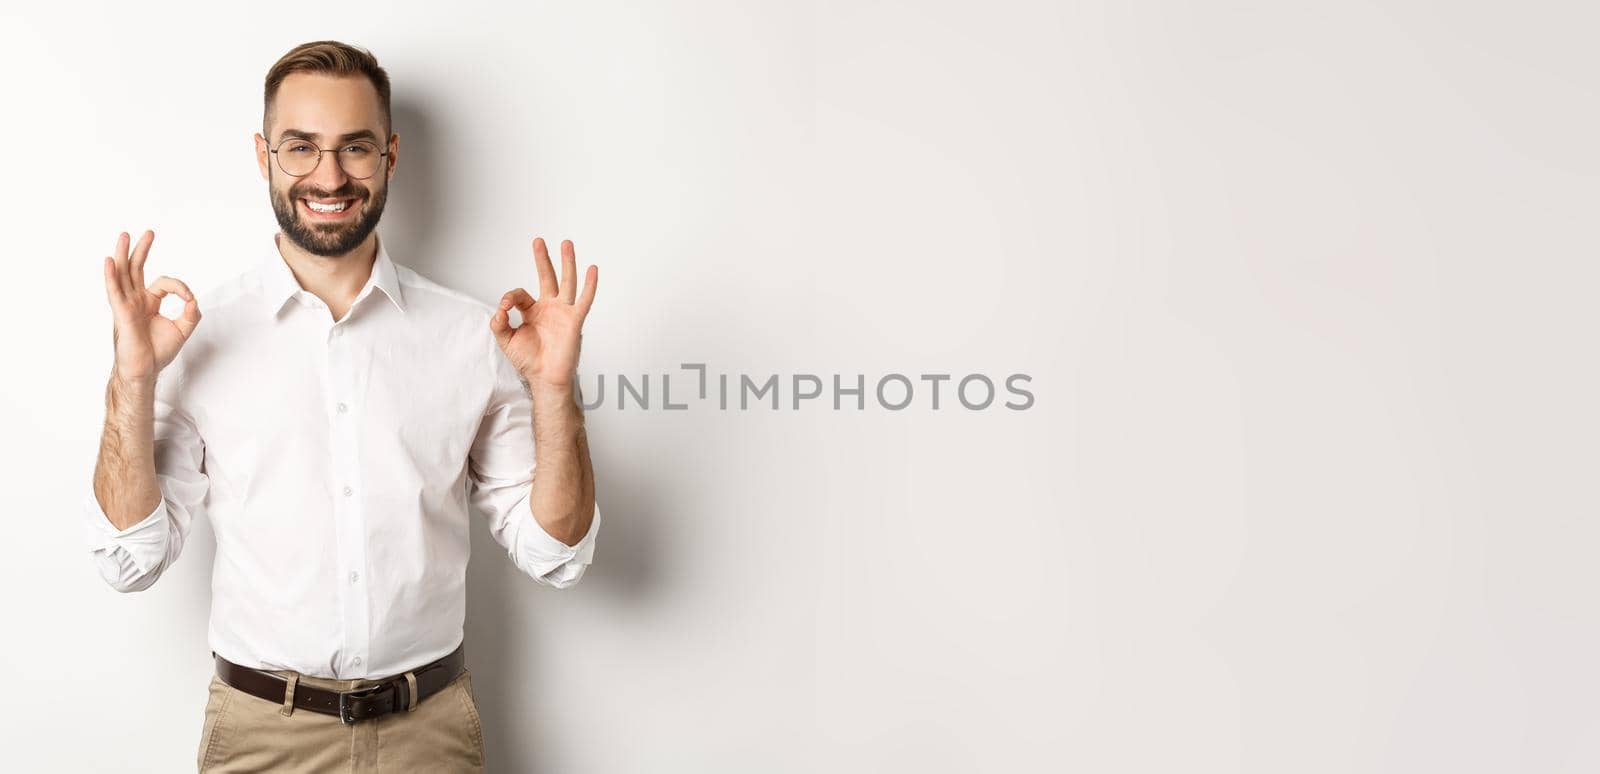 Satisfied handsome businessman showing ok sign, gurantee quallity, standing pleased against white background.